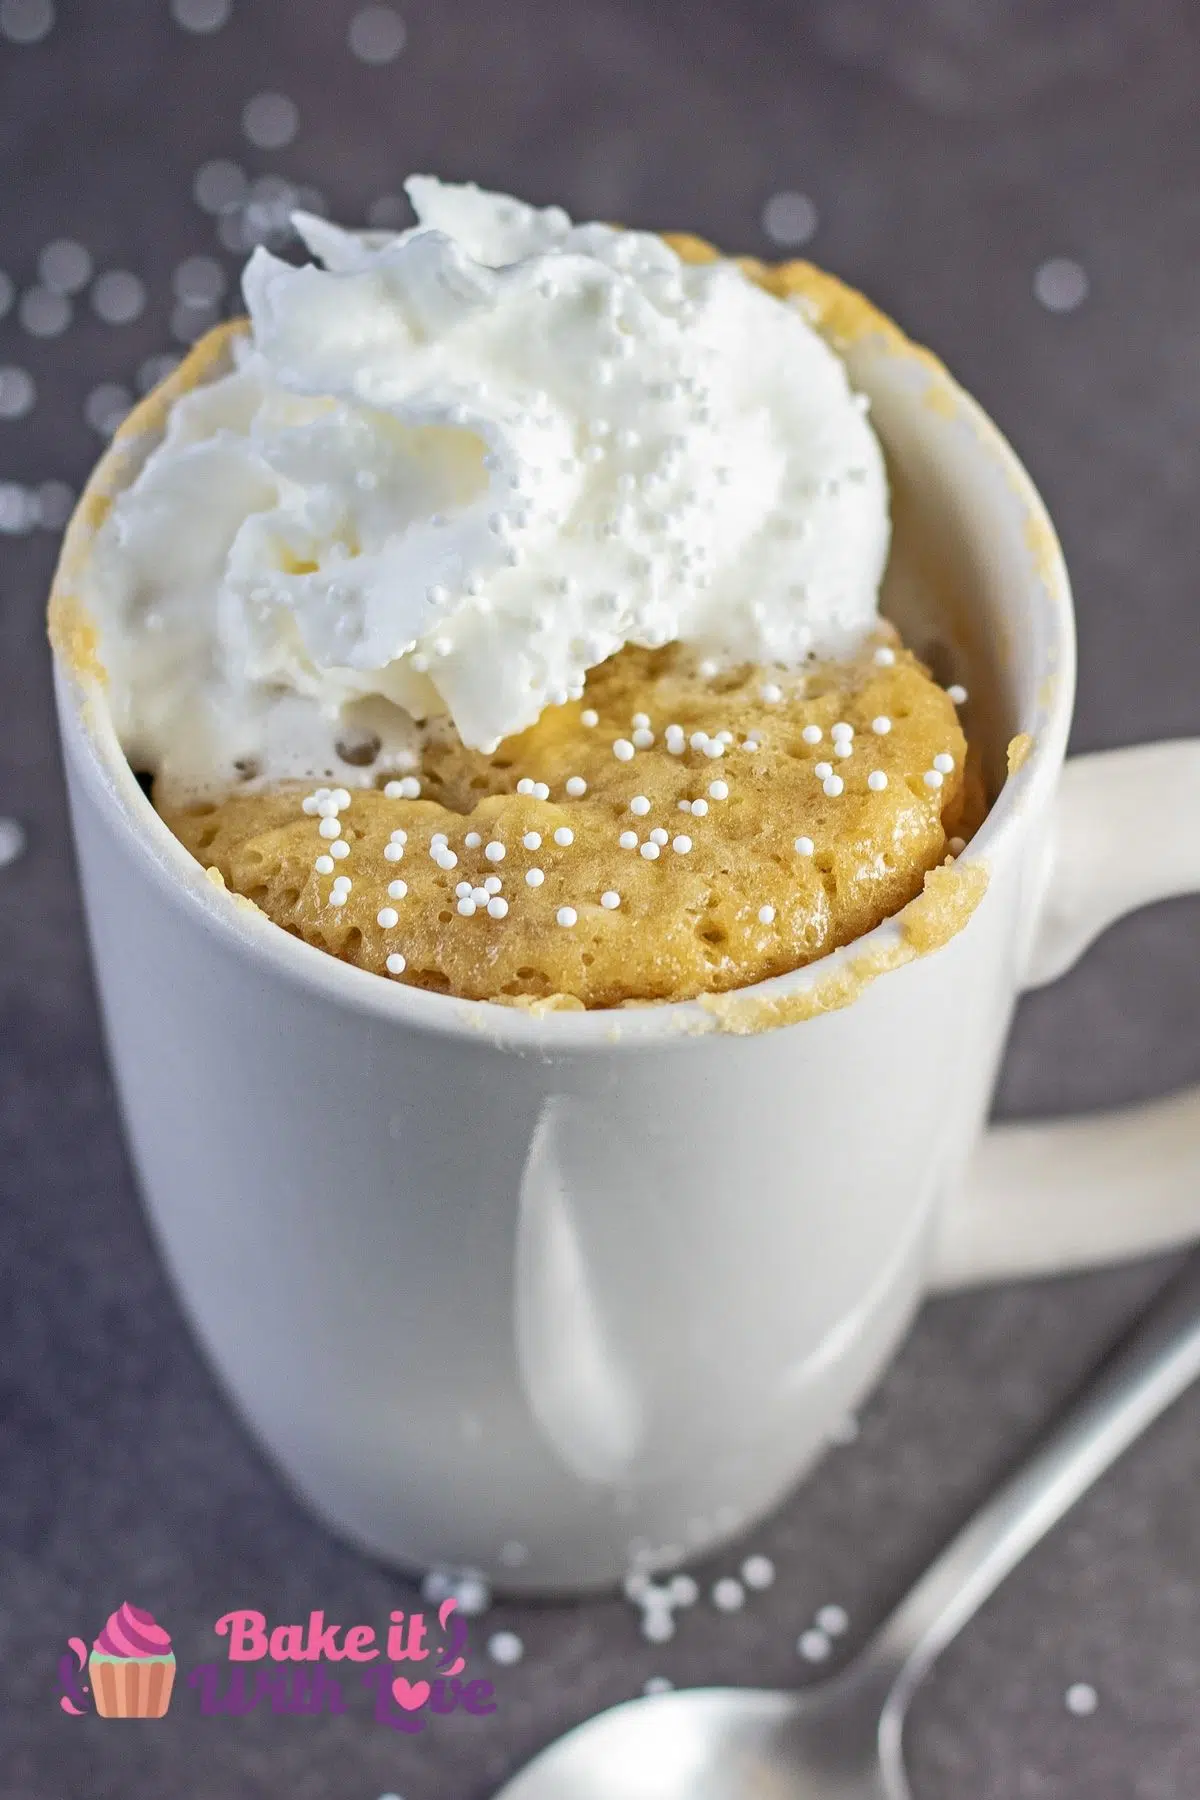 Best banana mug cake recipe served in white coffee mug and topped with whipped cream and white sprinkles.